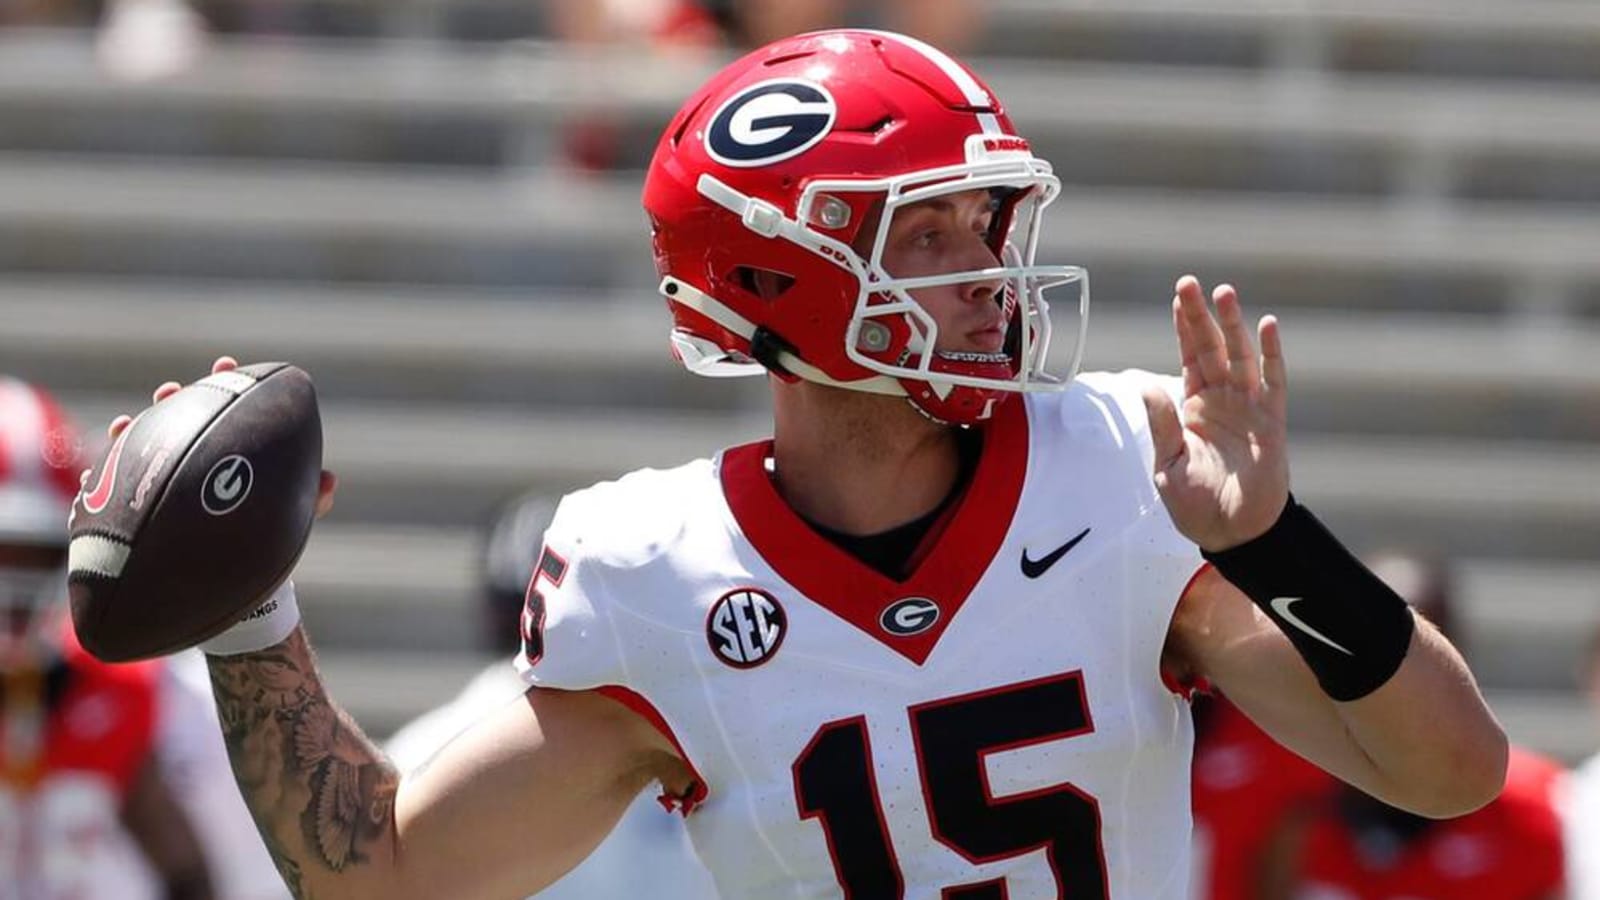 Spotlight: Carson Beck, Best Quarterback in the Country